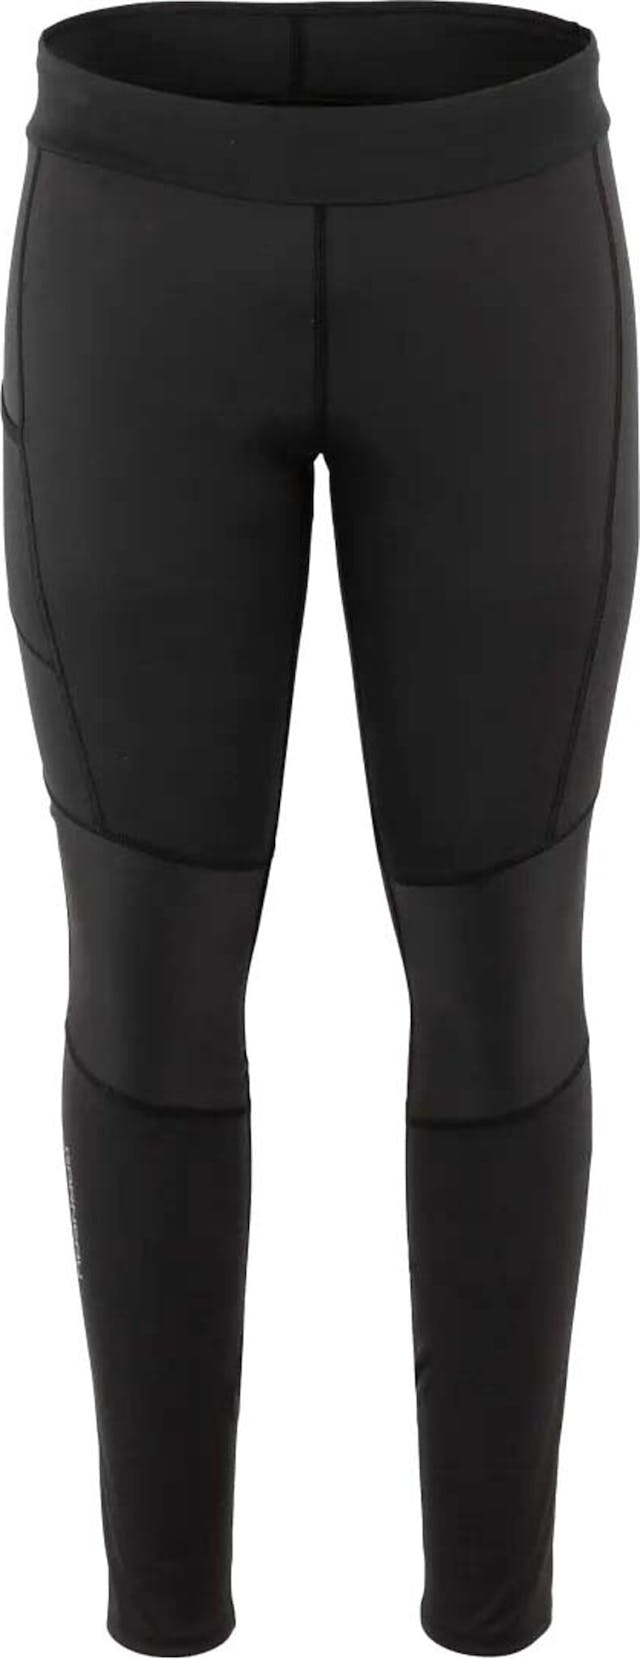 Product image for Solano Tight - Men's